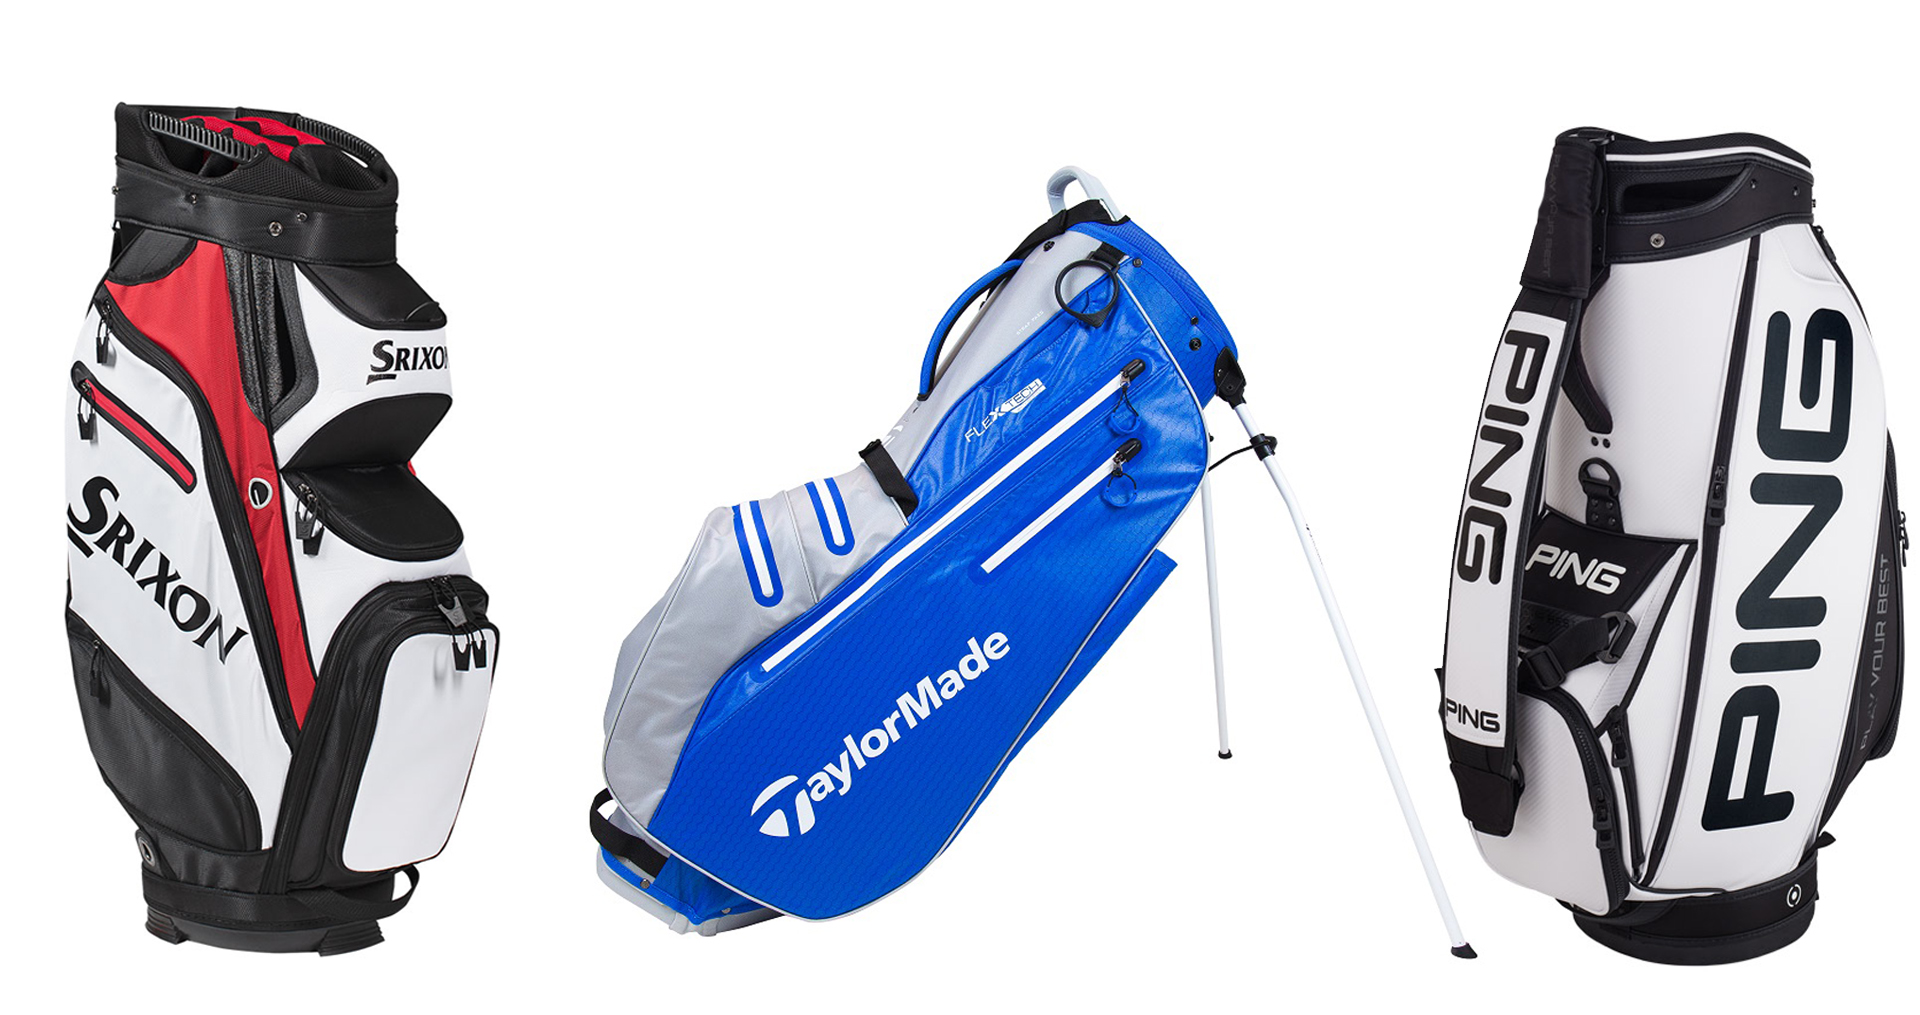 Cart bag, stand bag or carry bag: What you need to know for golf bags